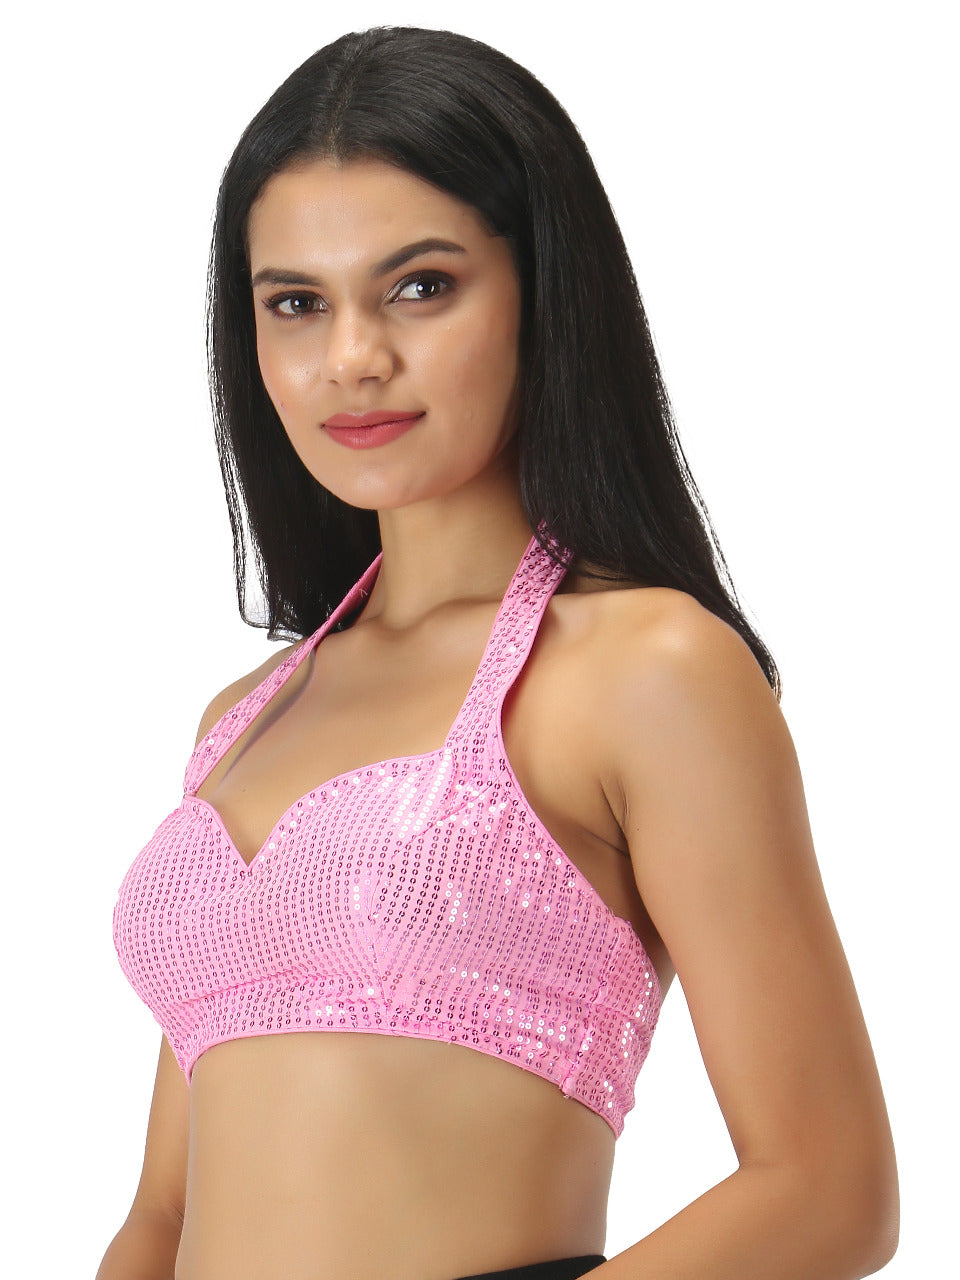 Saree Blouse Top in Shimmering Pink - Indian Clothing in Denver, CO, Aurora, CO, Boulder, CO, Fort Collins, CO, Colorado Springs, CO, Parker, CO, Highlands Ranch, CO, Cherry Creek, CO, Centennial, CO, and Longmont, CO. Nationwide shipping USA - India Fashion X